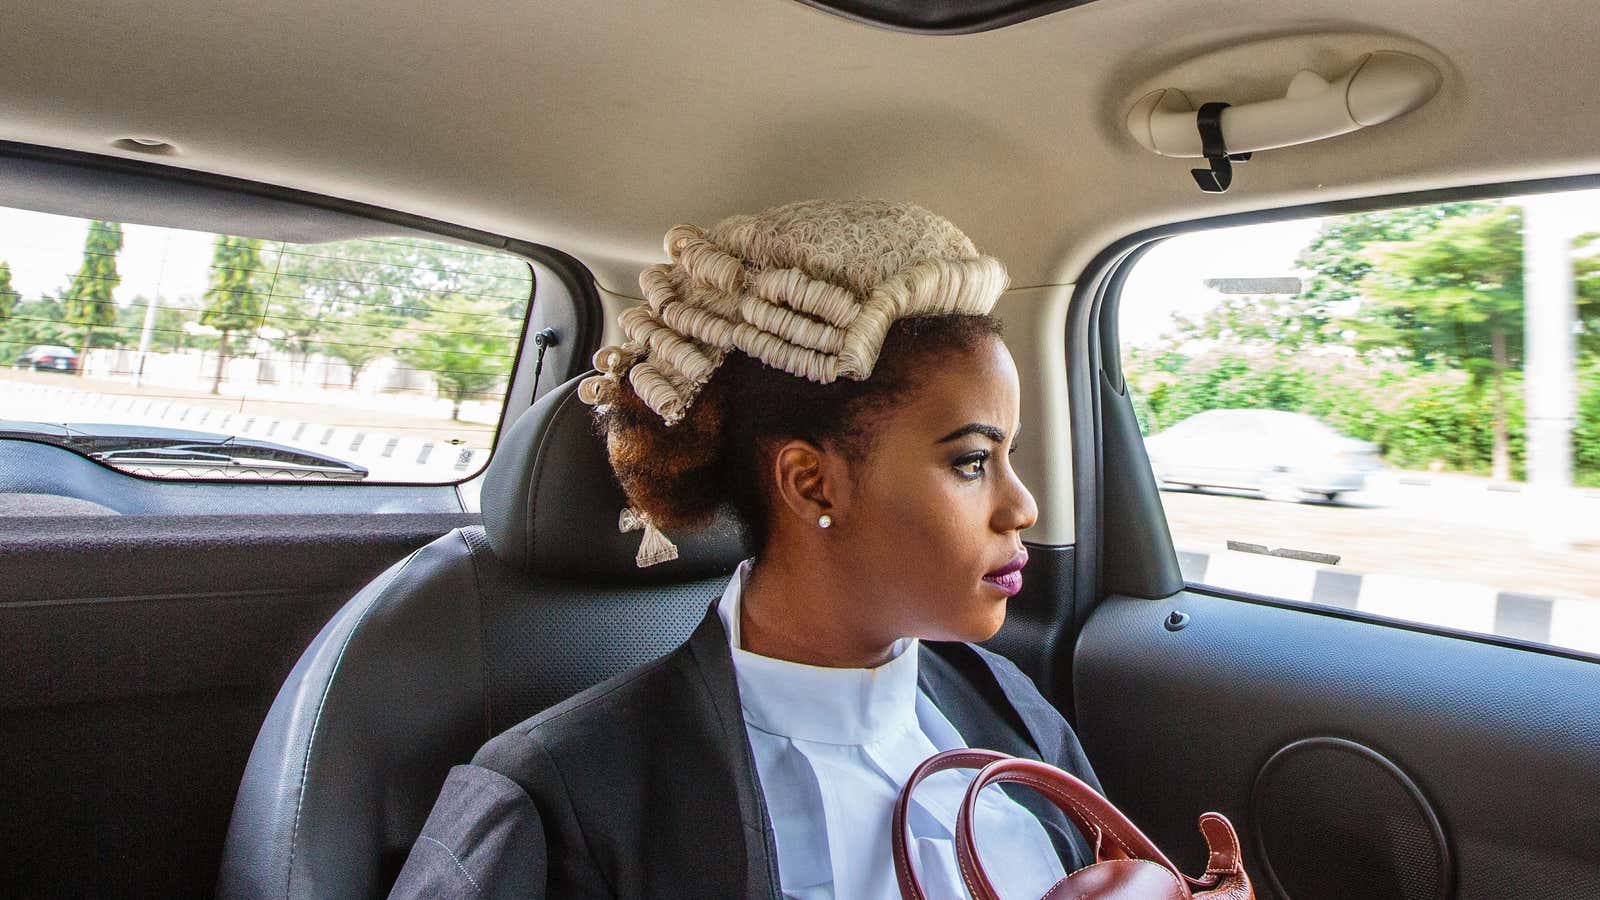 Ginika is on her way to join thousands of Nigerian law graduates called to bar in Abuja, Nigeria.